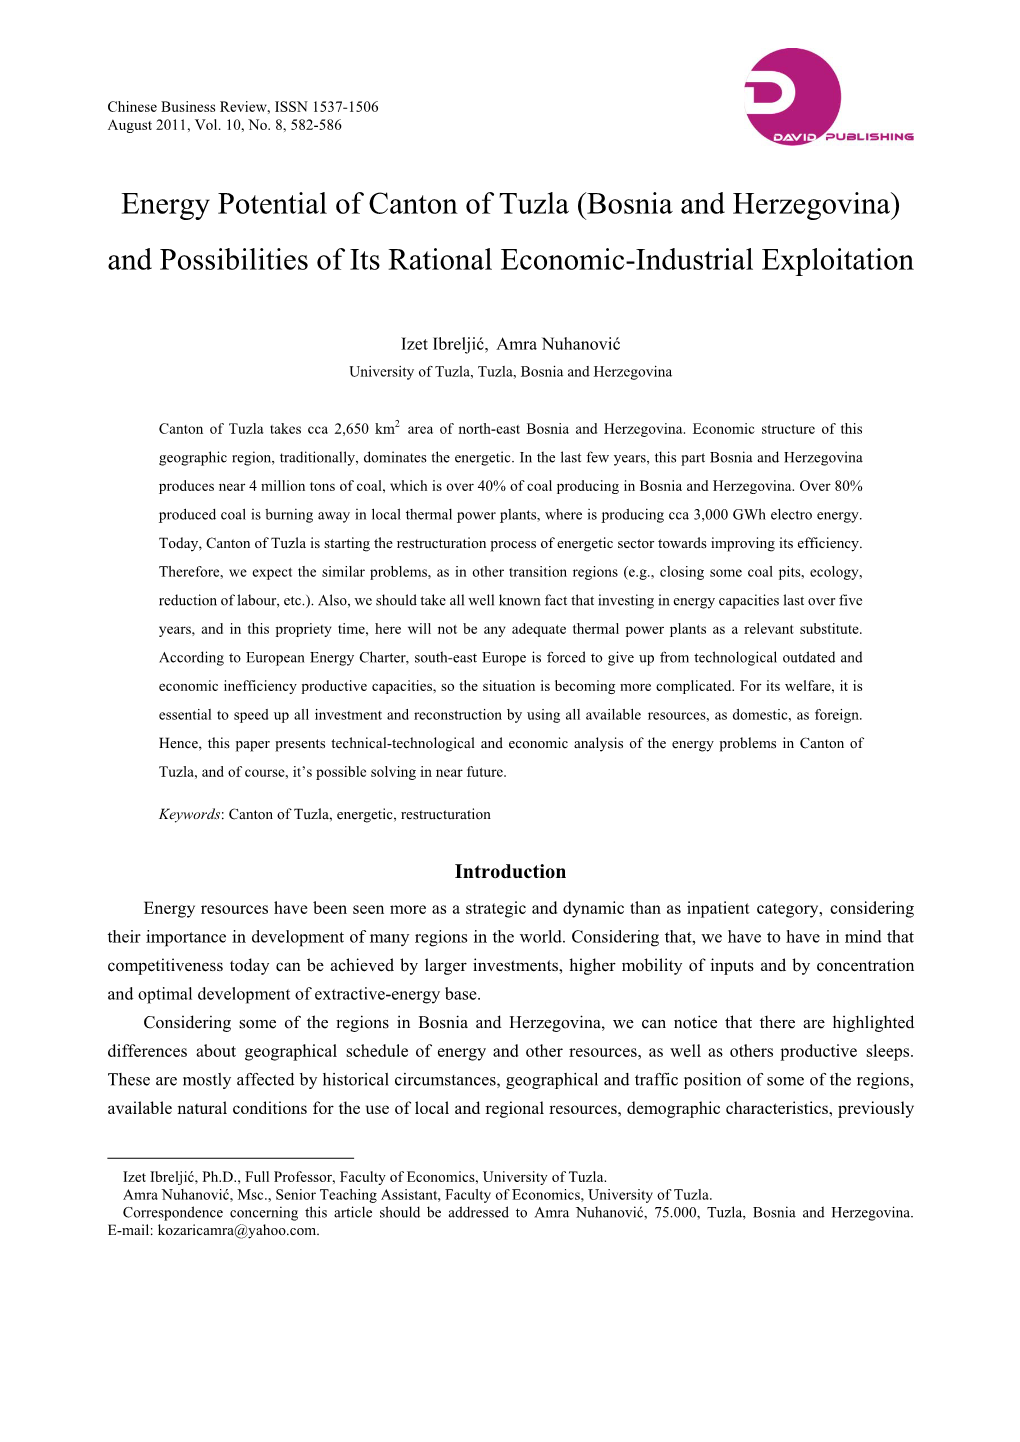 Energy Potential of Canton of Tuzla (Bosnia and Herzegovina) and Possibilities of Its Rational Economic-Industrial Exploitation